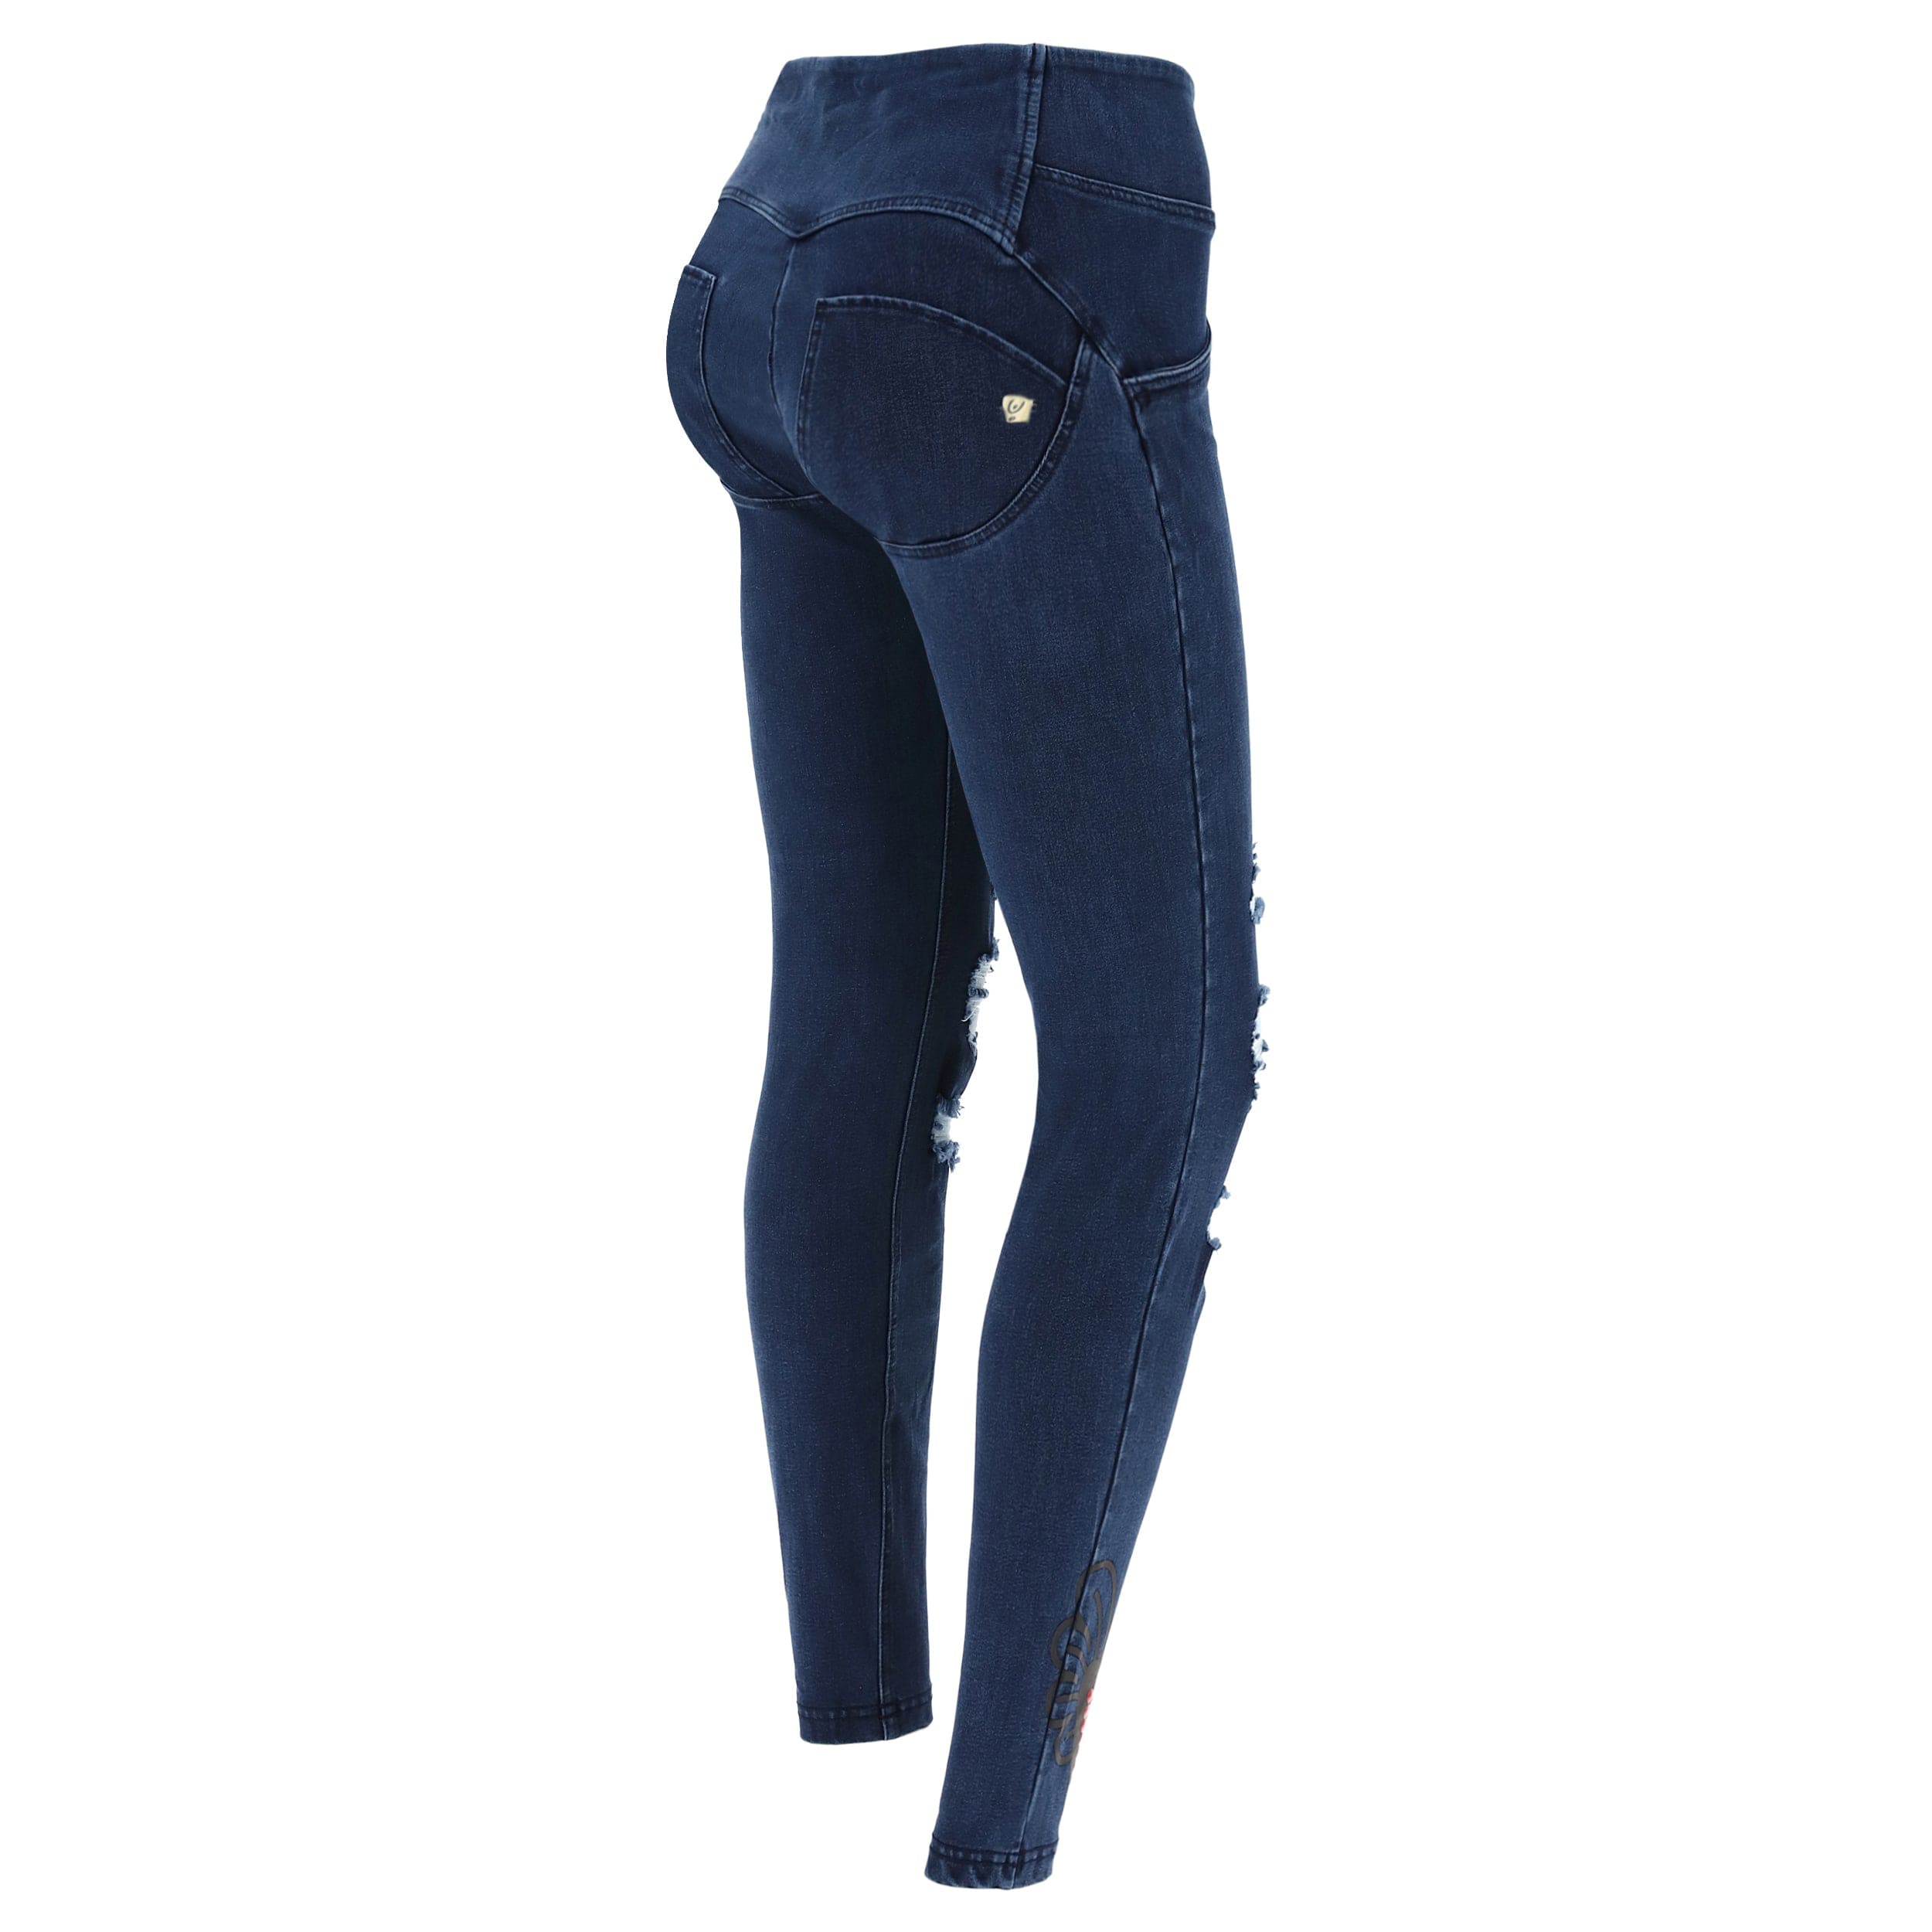 WR.UP® Ripped Denim with Winged Heart - 3 Button Mid waist - Full Length - Dark Blue + Blue Stitching 1